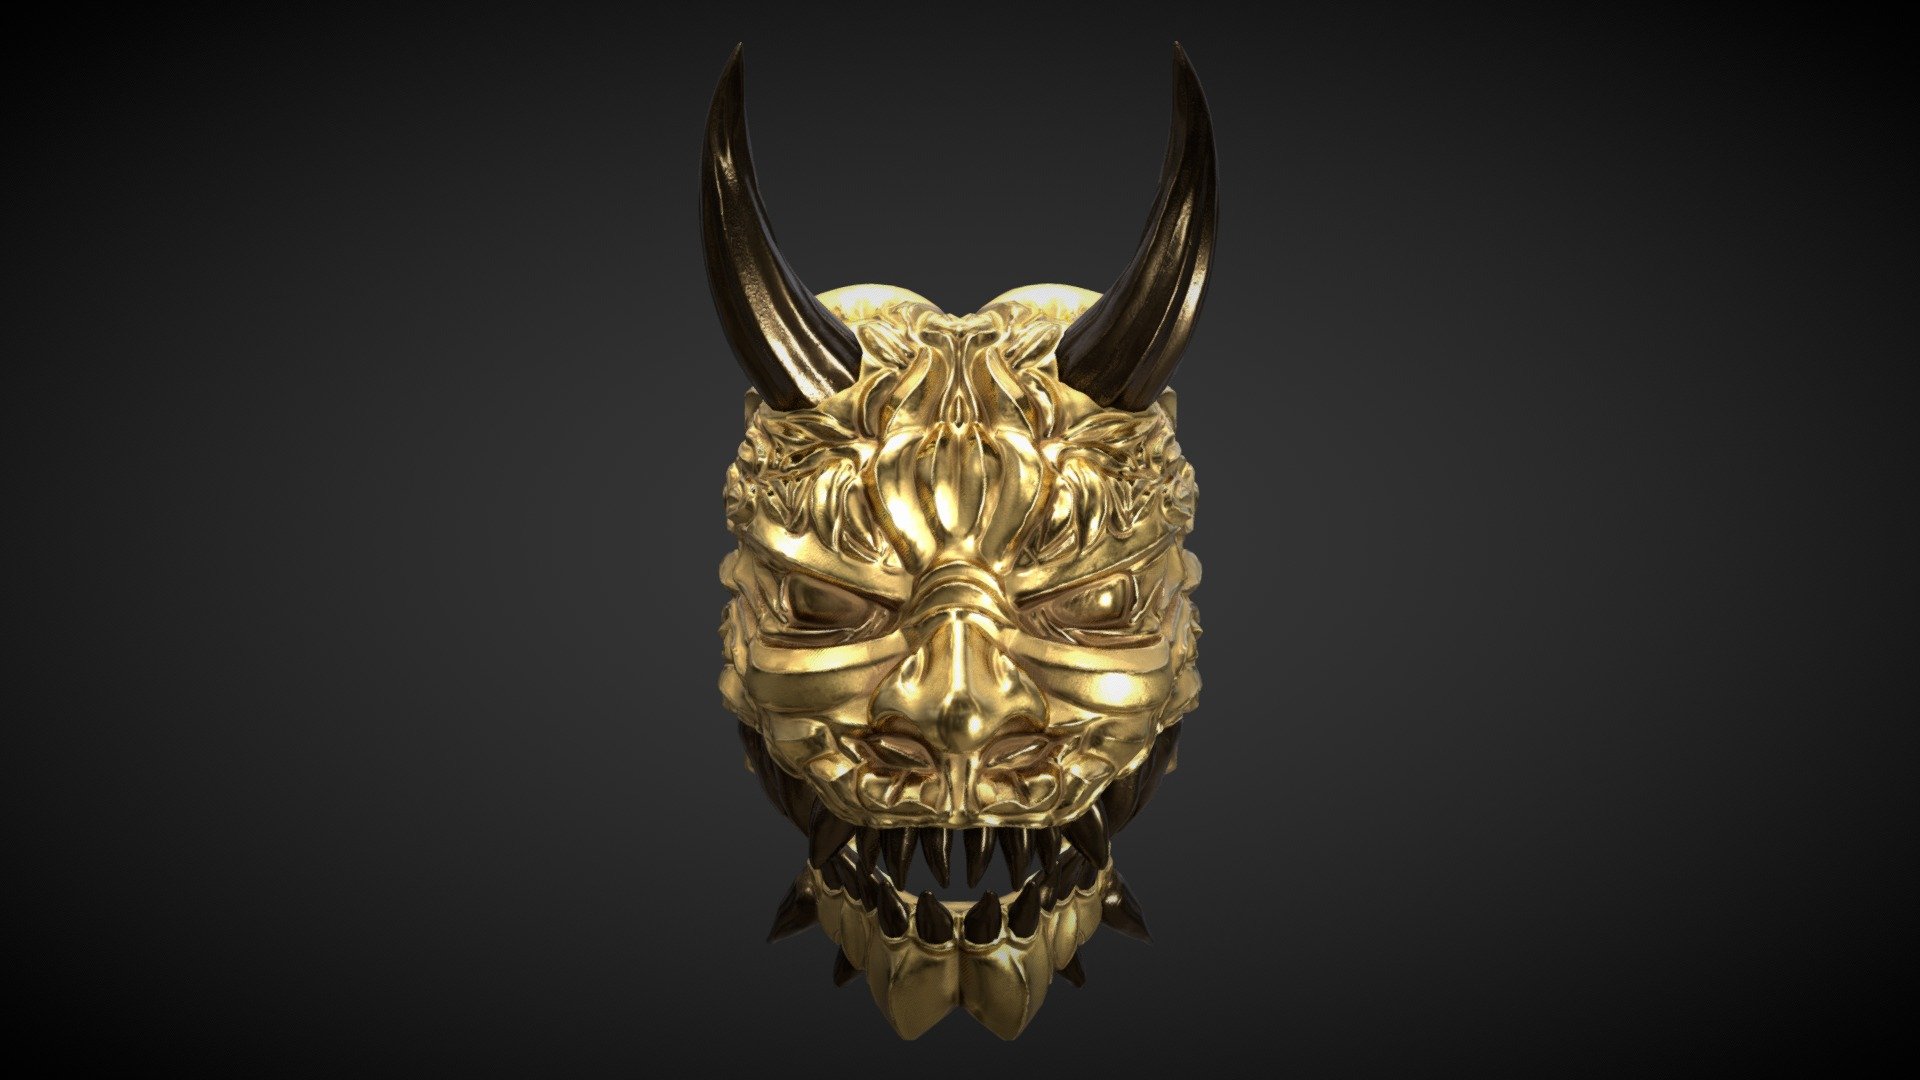 Demon mask made in ZBrush, the design is original as I was experimenting with the DamStandard brush. I really liked how it was turning out, so I decided to finish it 3d model